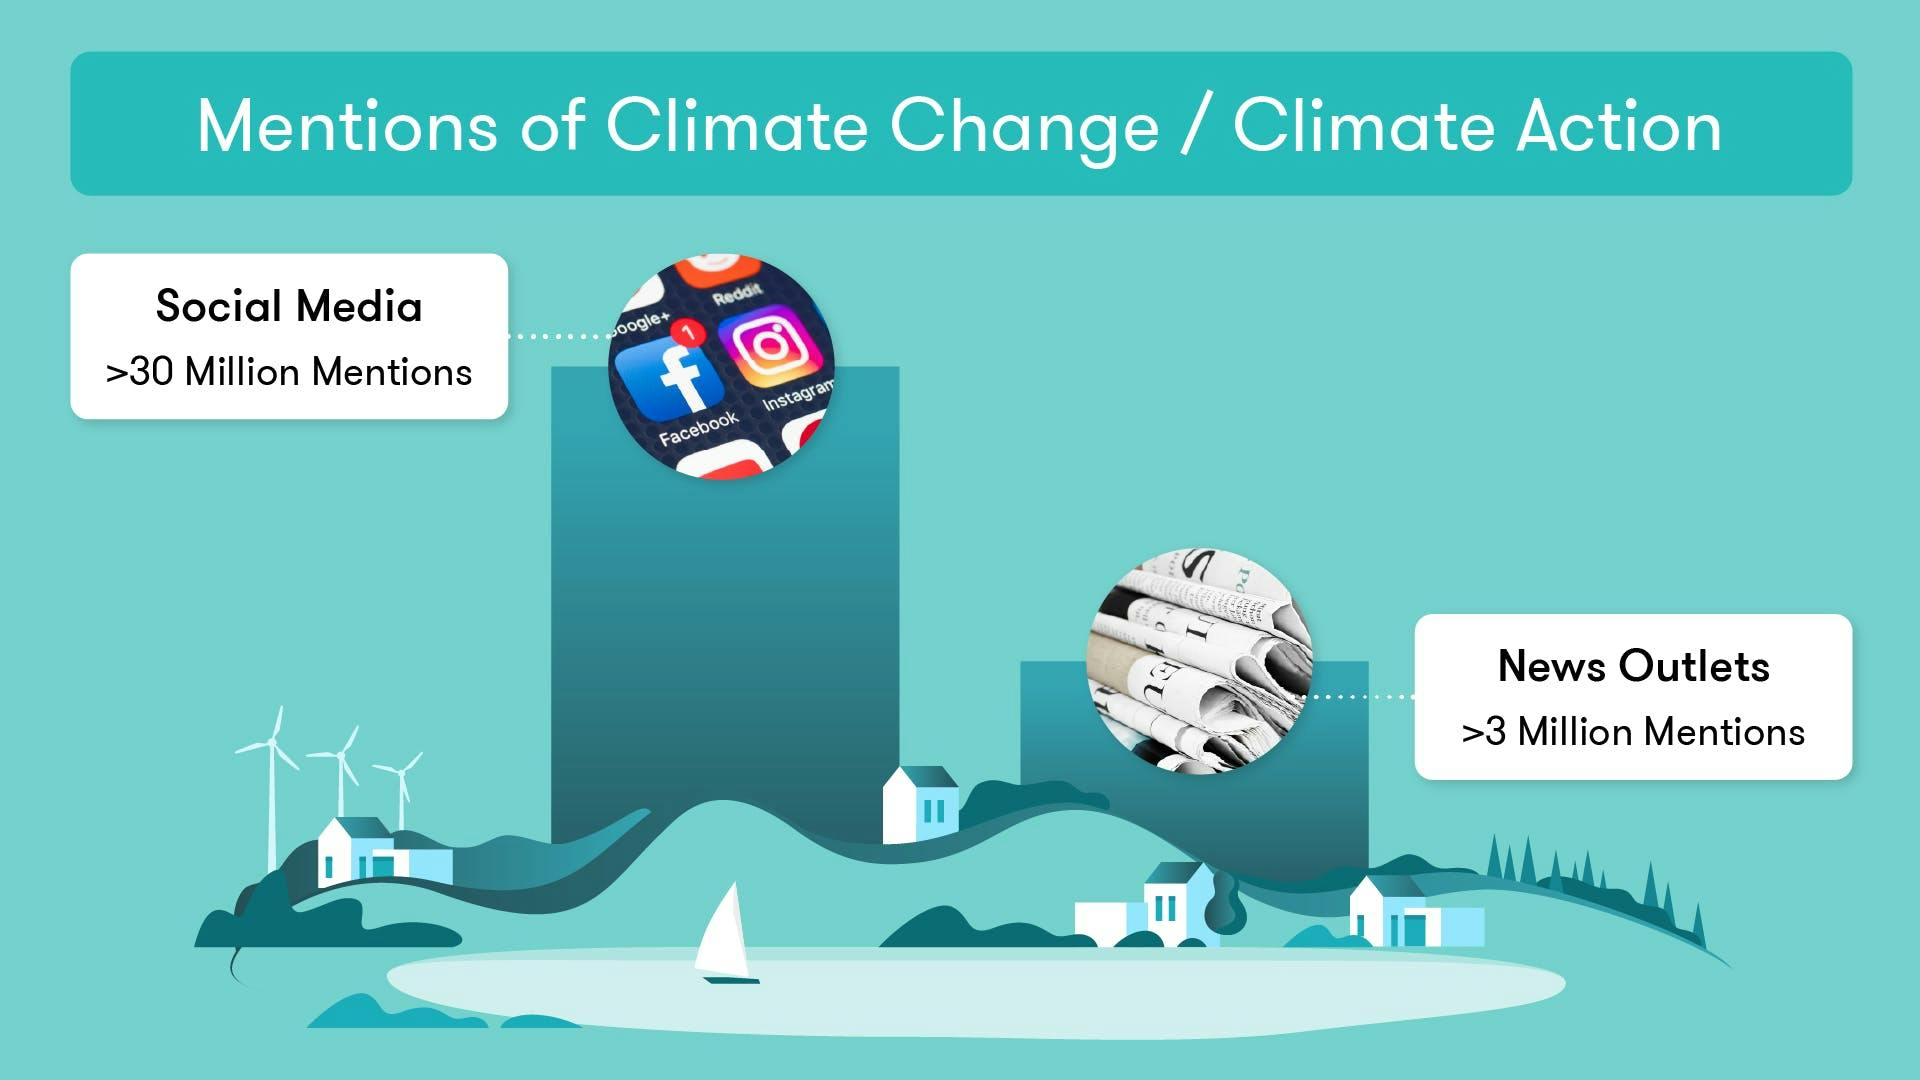 Climate action mentions on social media and news this year